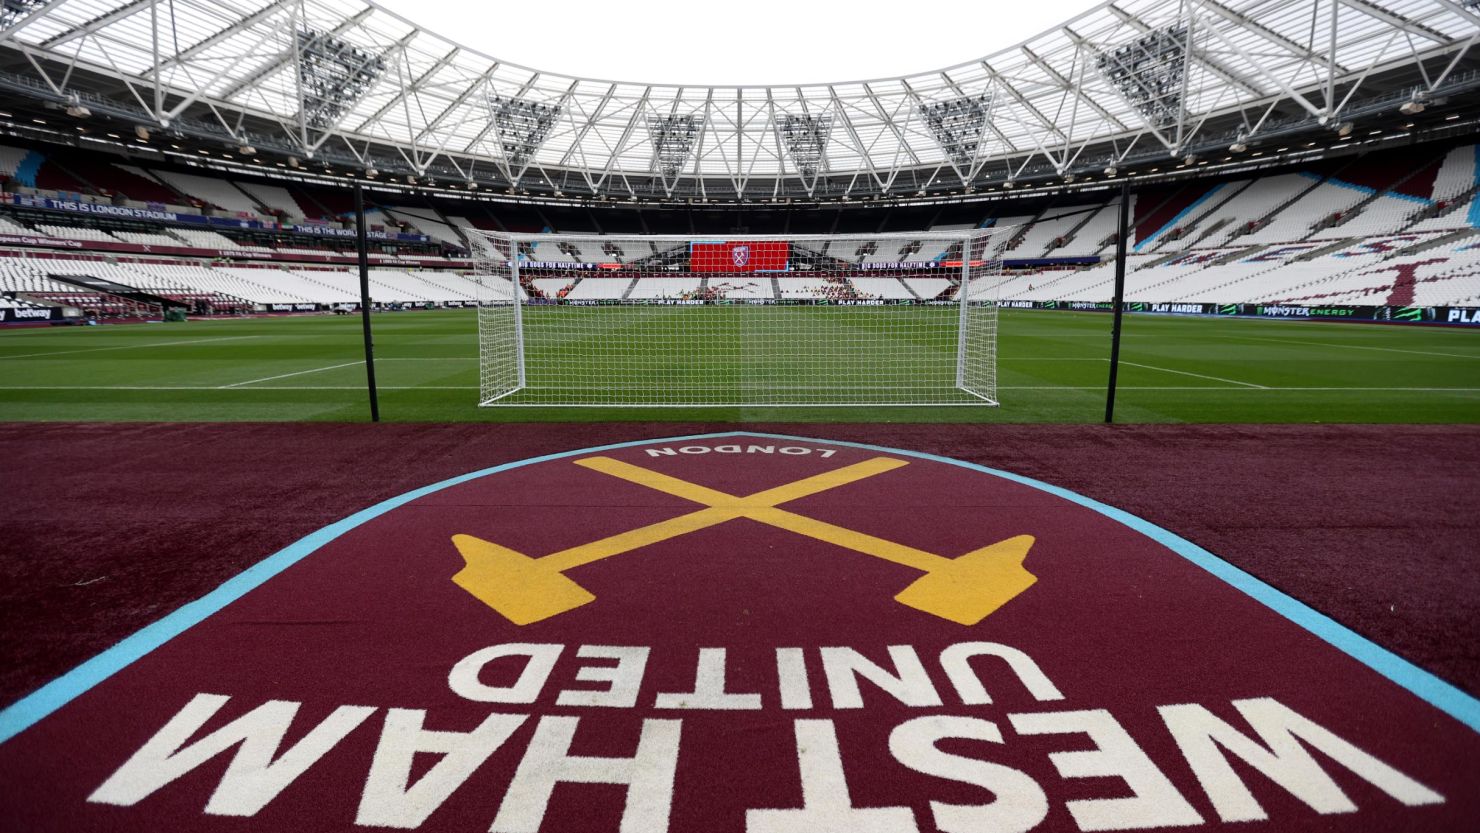 West Ham United said it had identified two offenders.